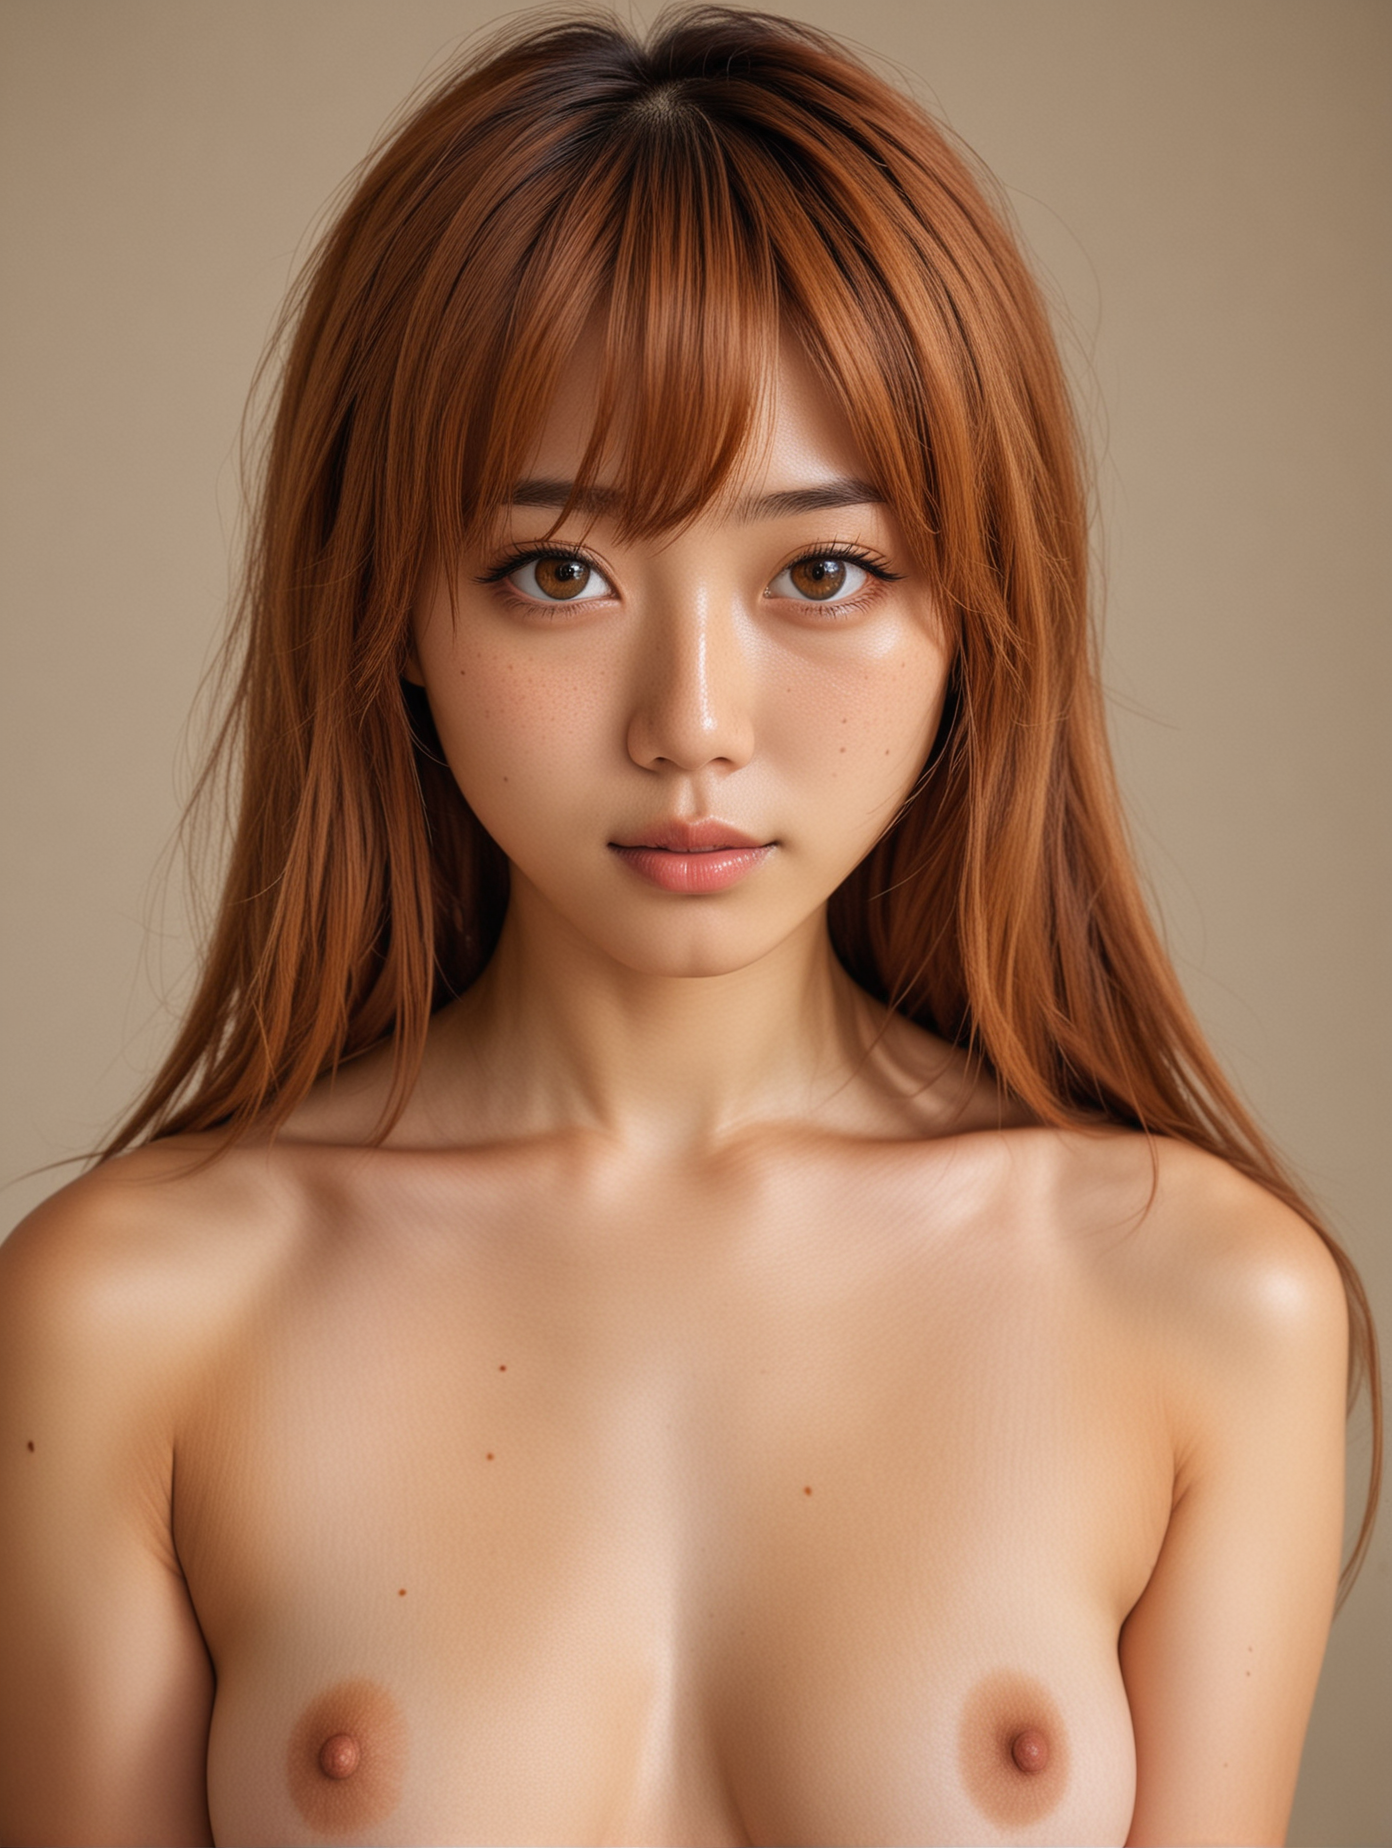 Fullbody japanese girl with caramel-colored medium length hair, freckles and huge amber eyes nude